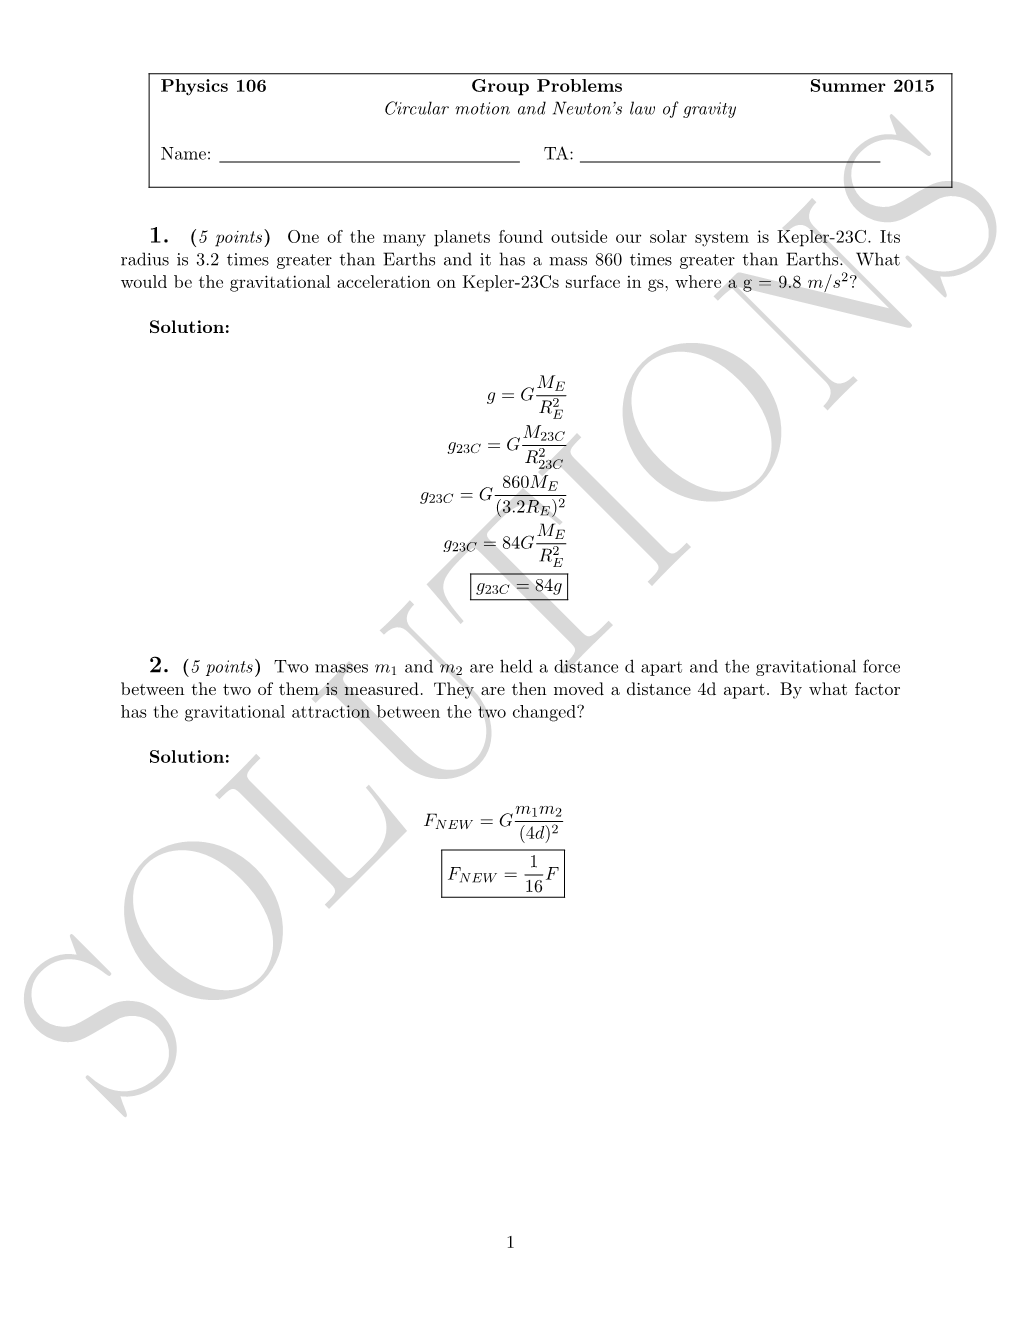 Physics 106 Group Problems Summer 2015 Circular Motion and Newton’S Law of Gravity